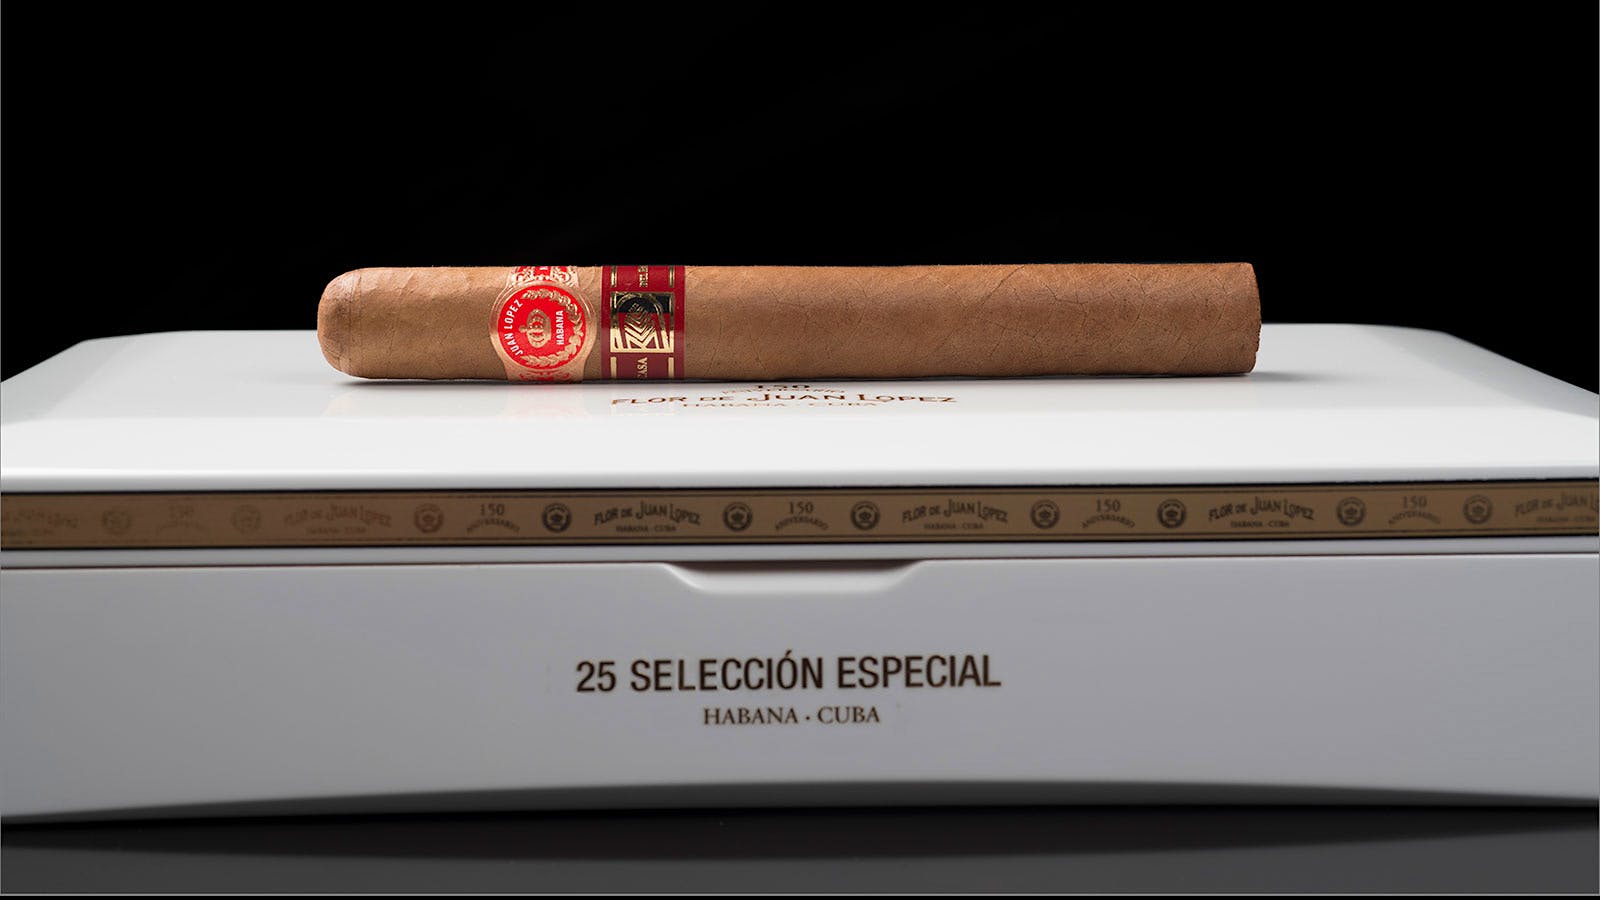 Juan Lopez Selección Especial measures 6 11/16 inches by 52 ring gauge and comes in 25-count boxes.